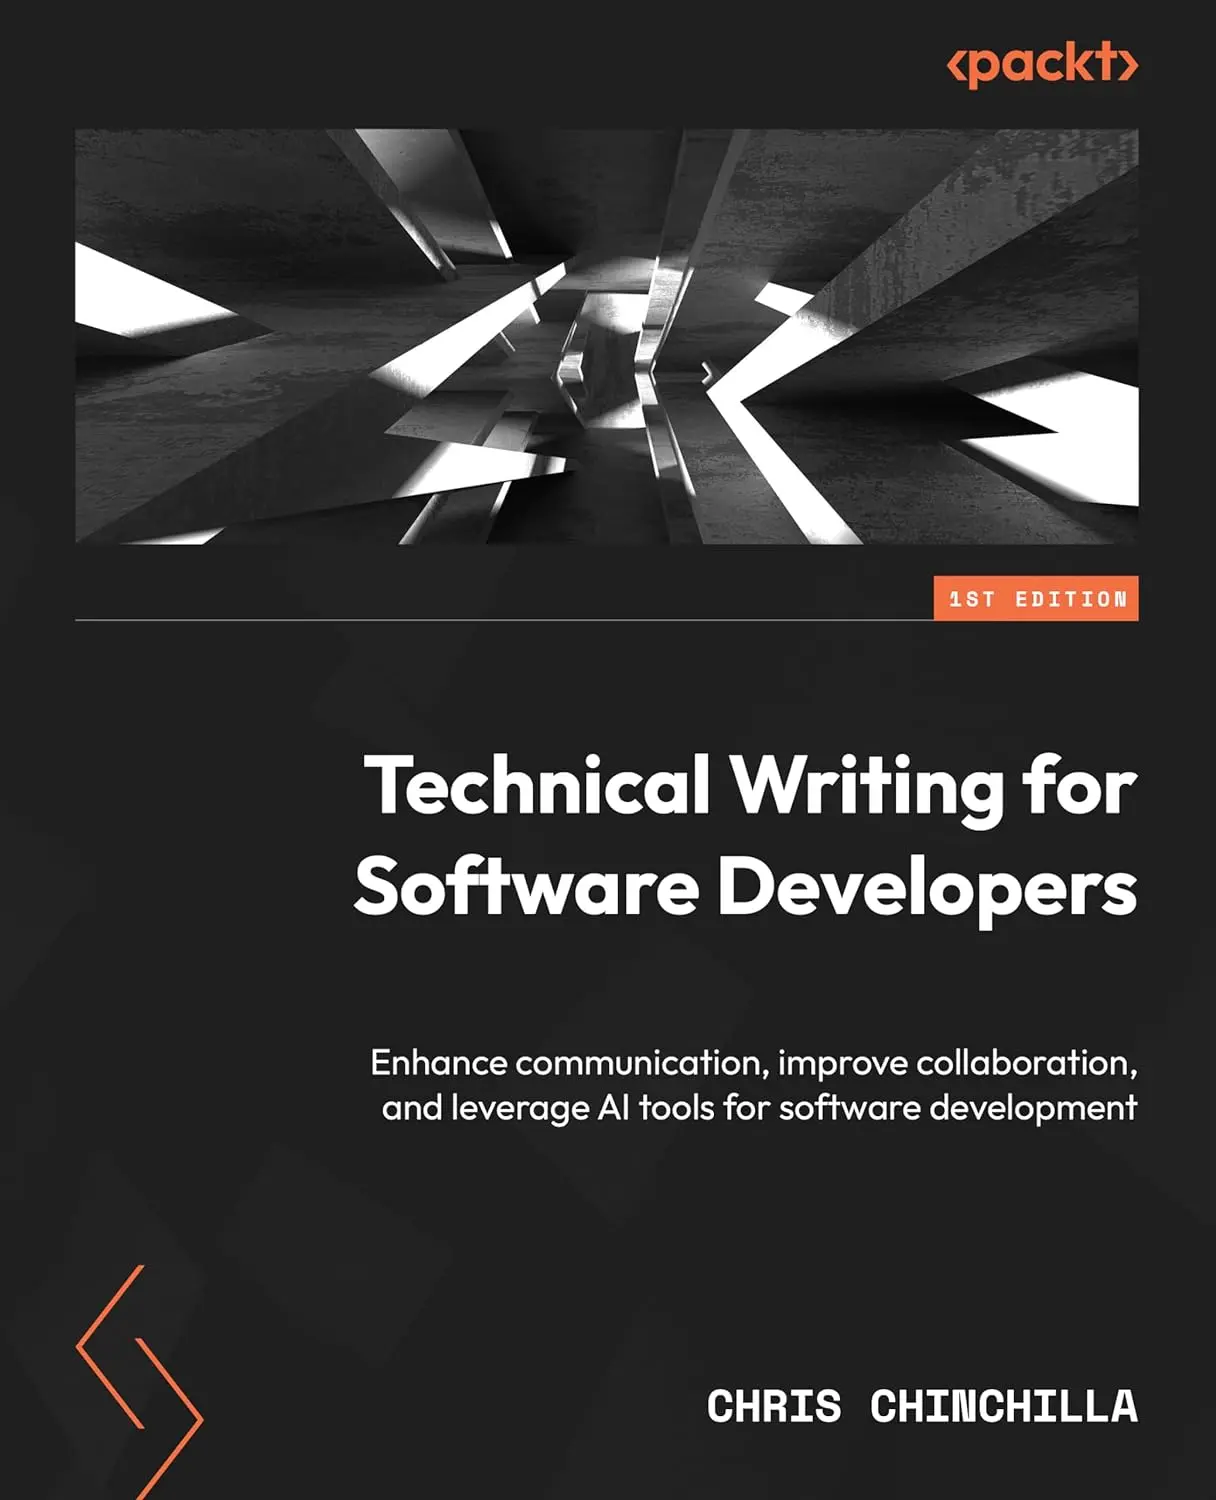 Technical Writing for Software Developers